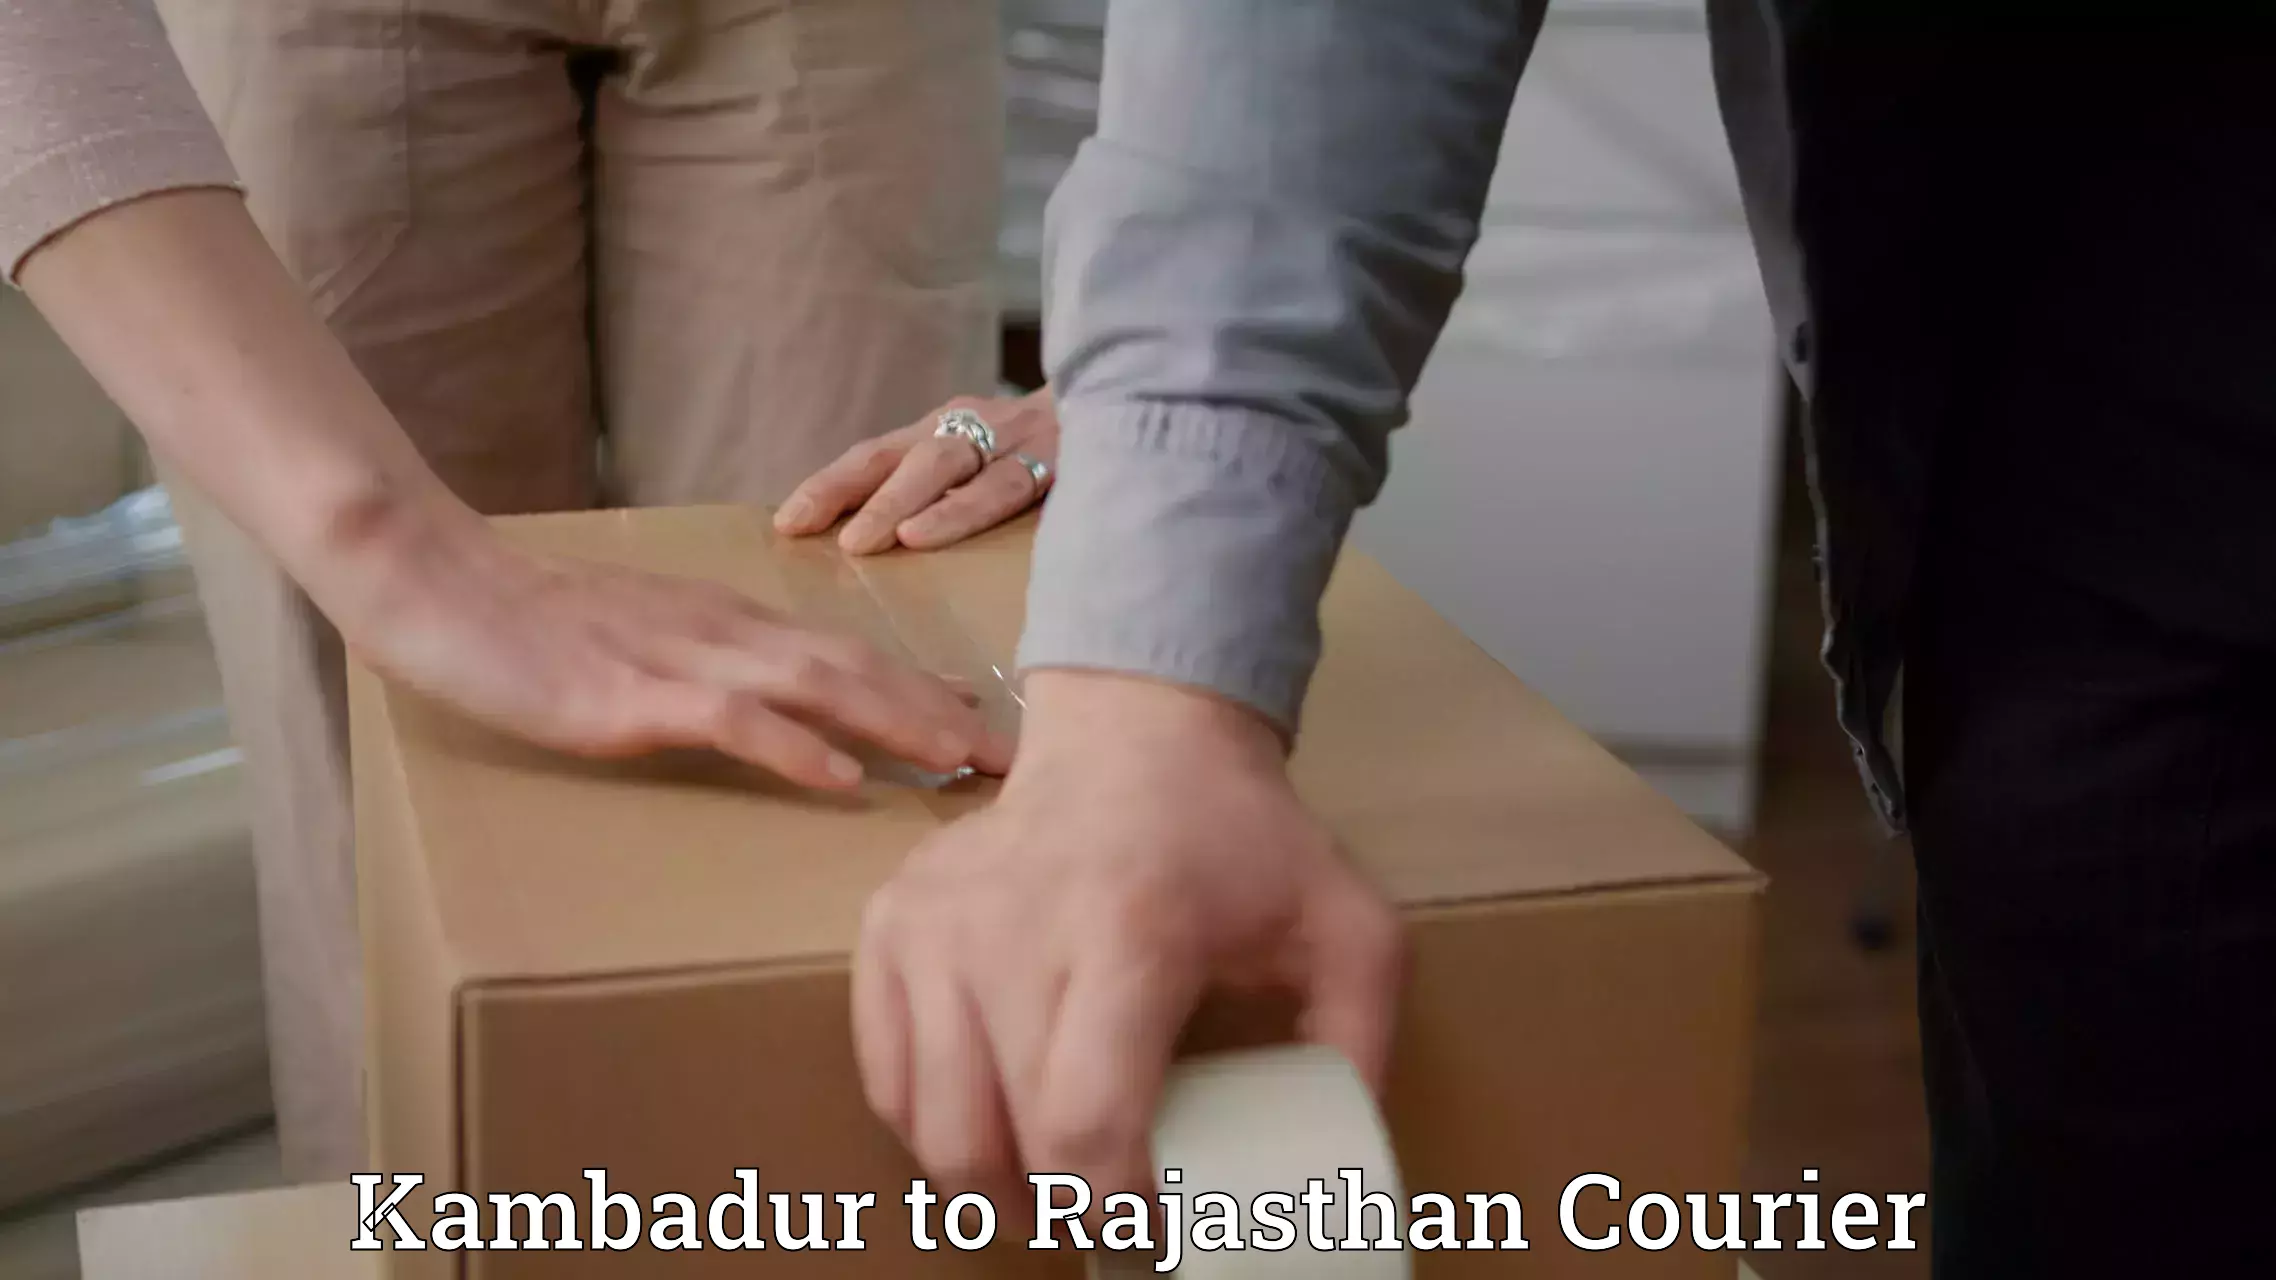 Multi-city courier Kambadur to Yeswanthapur